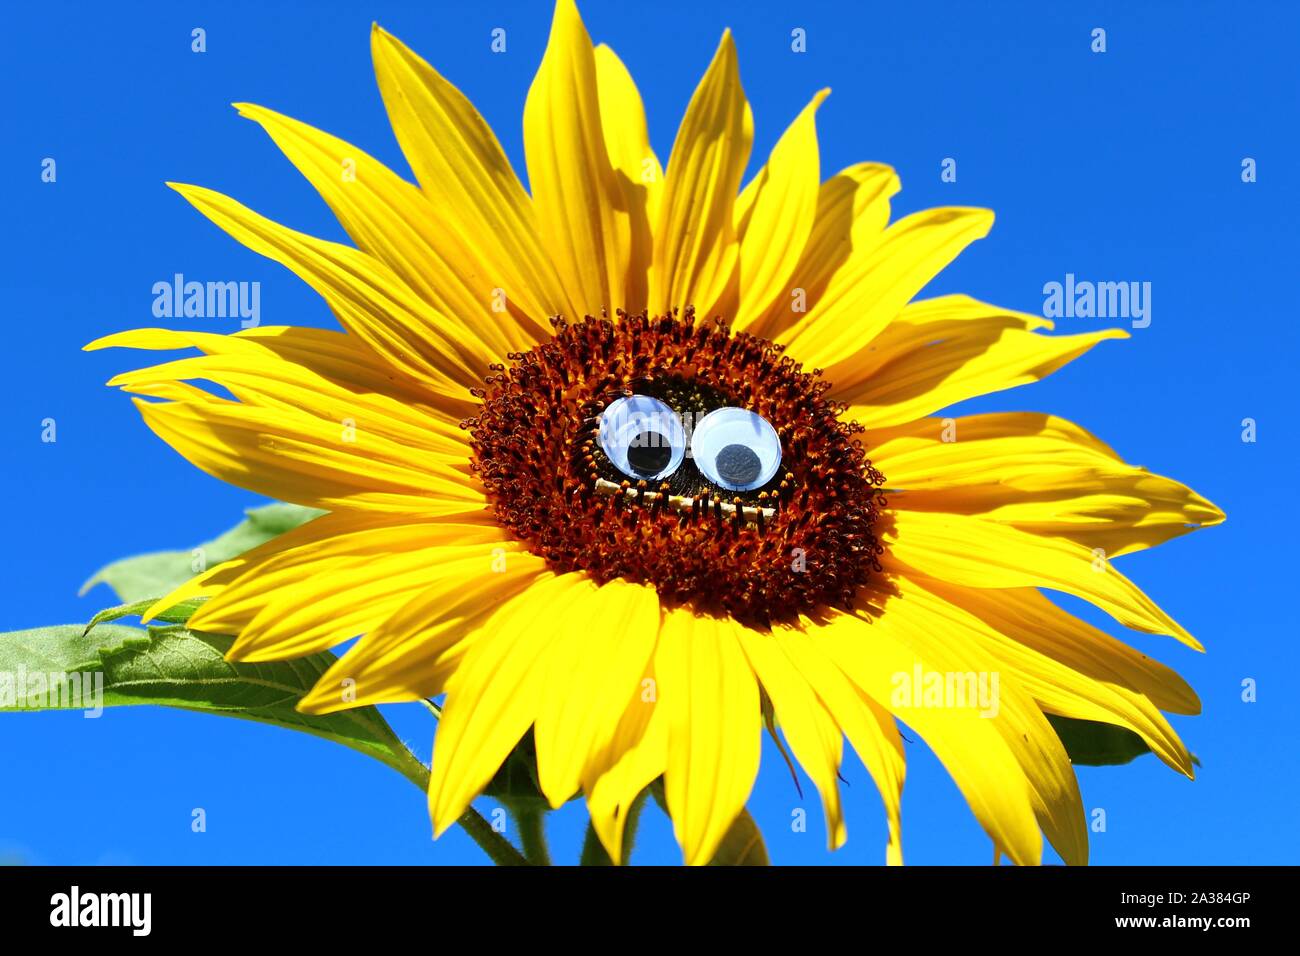 The picture shows a funny sunflower with a face. Stock Photo